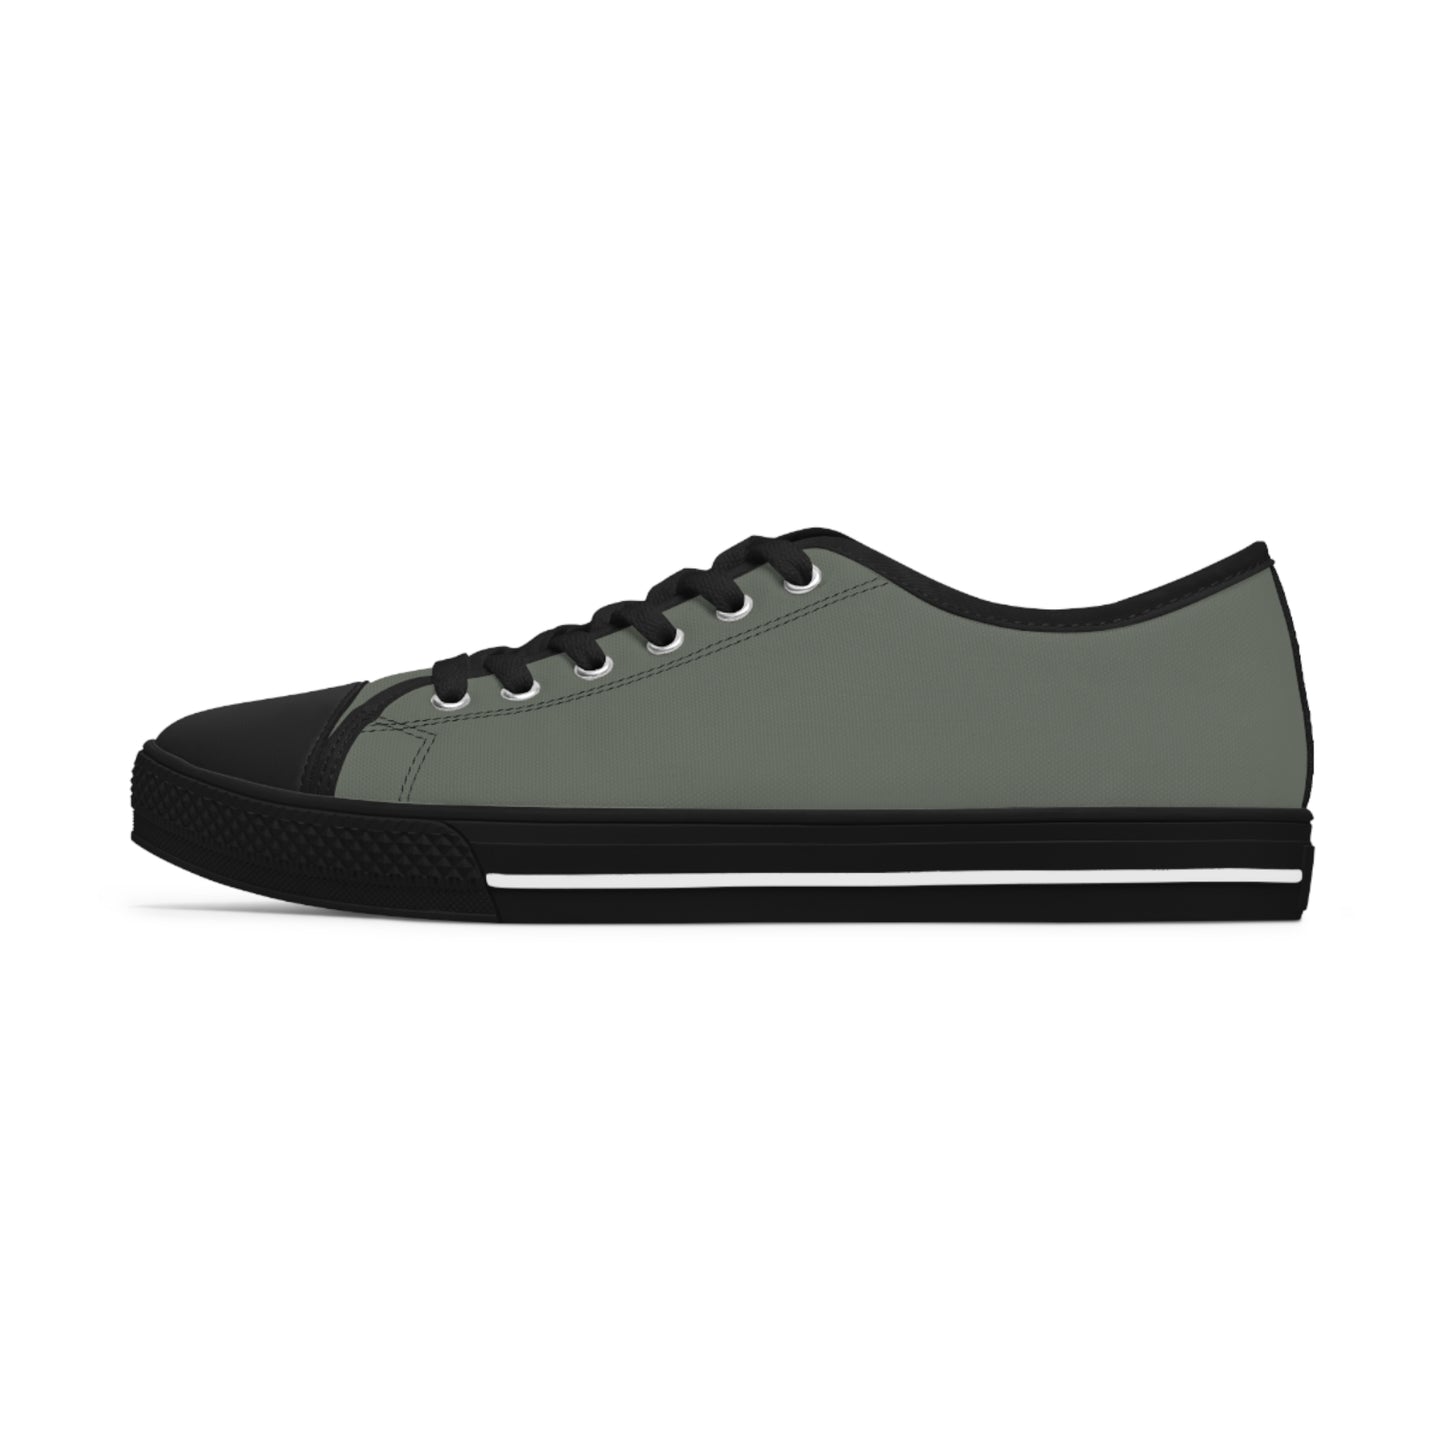 Women's Canvas Low Top Solid Color Sneakers - Drab Olive Gray US 12 White sole